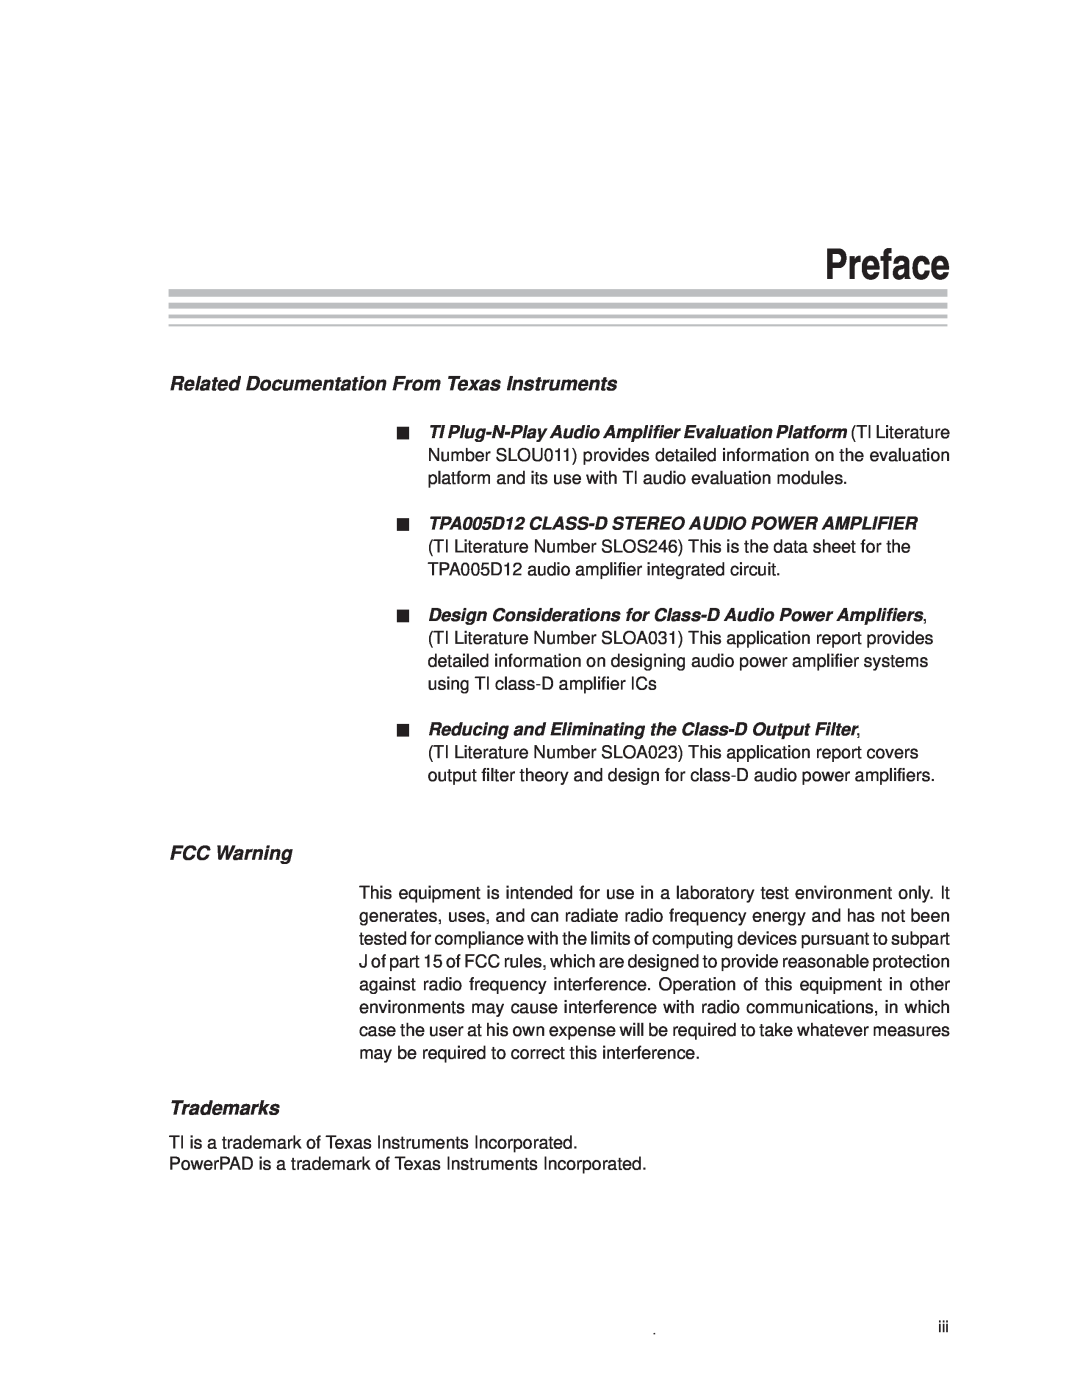 Texas Instruments TPA005D12 manual Preface, Related Documentation From Texas Instruments, FCC Warning, Trademarks 